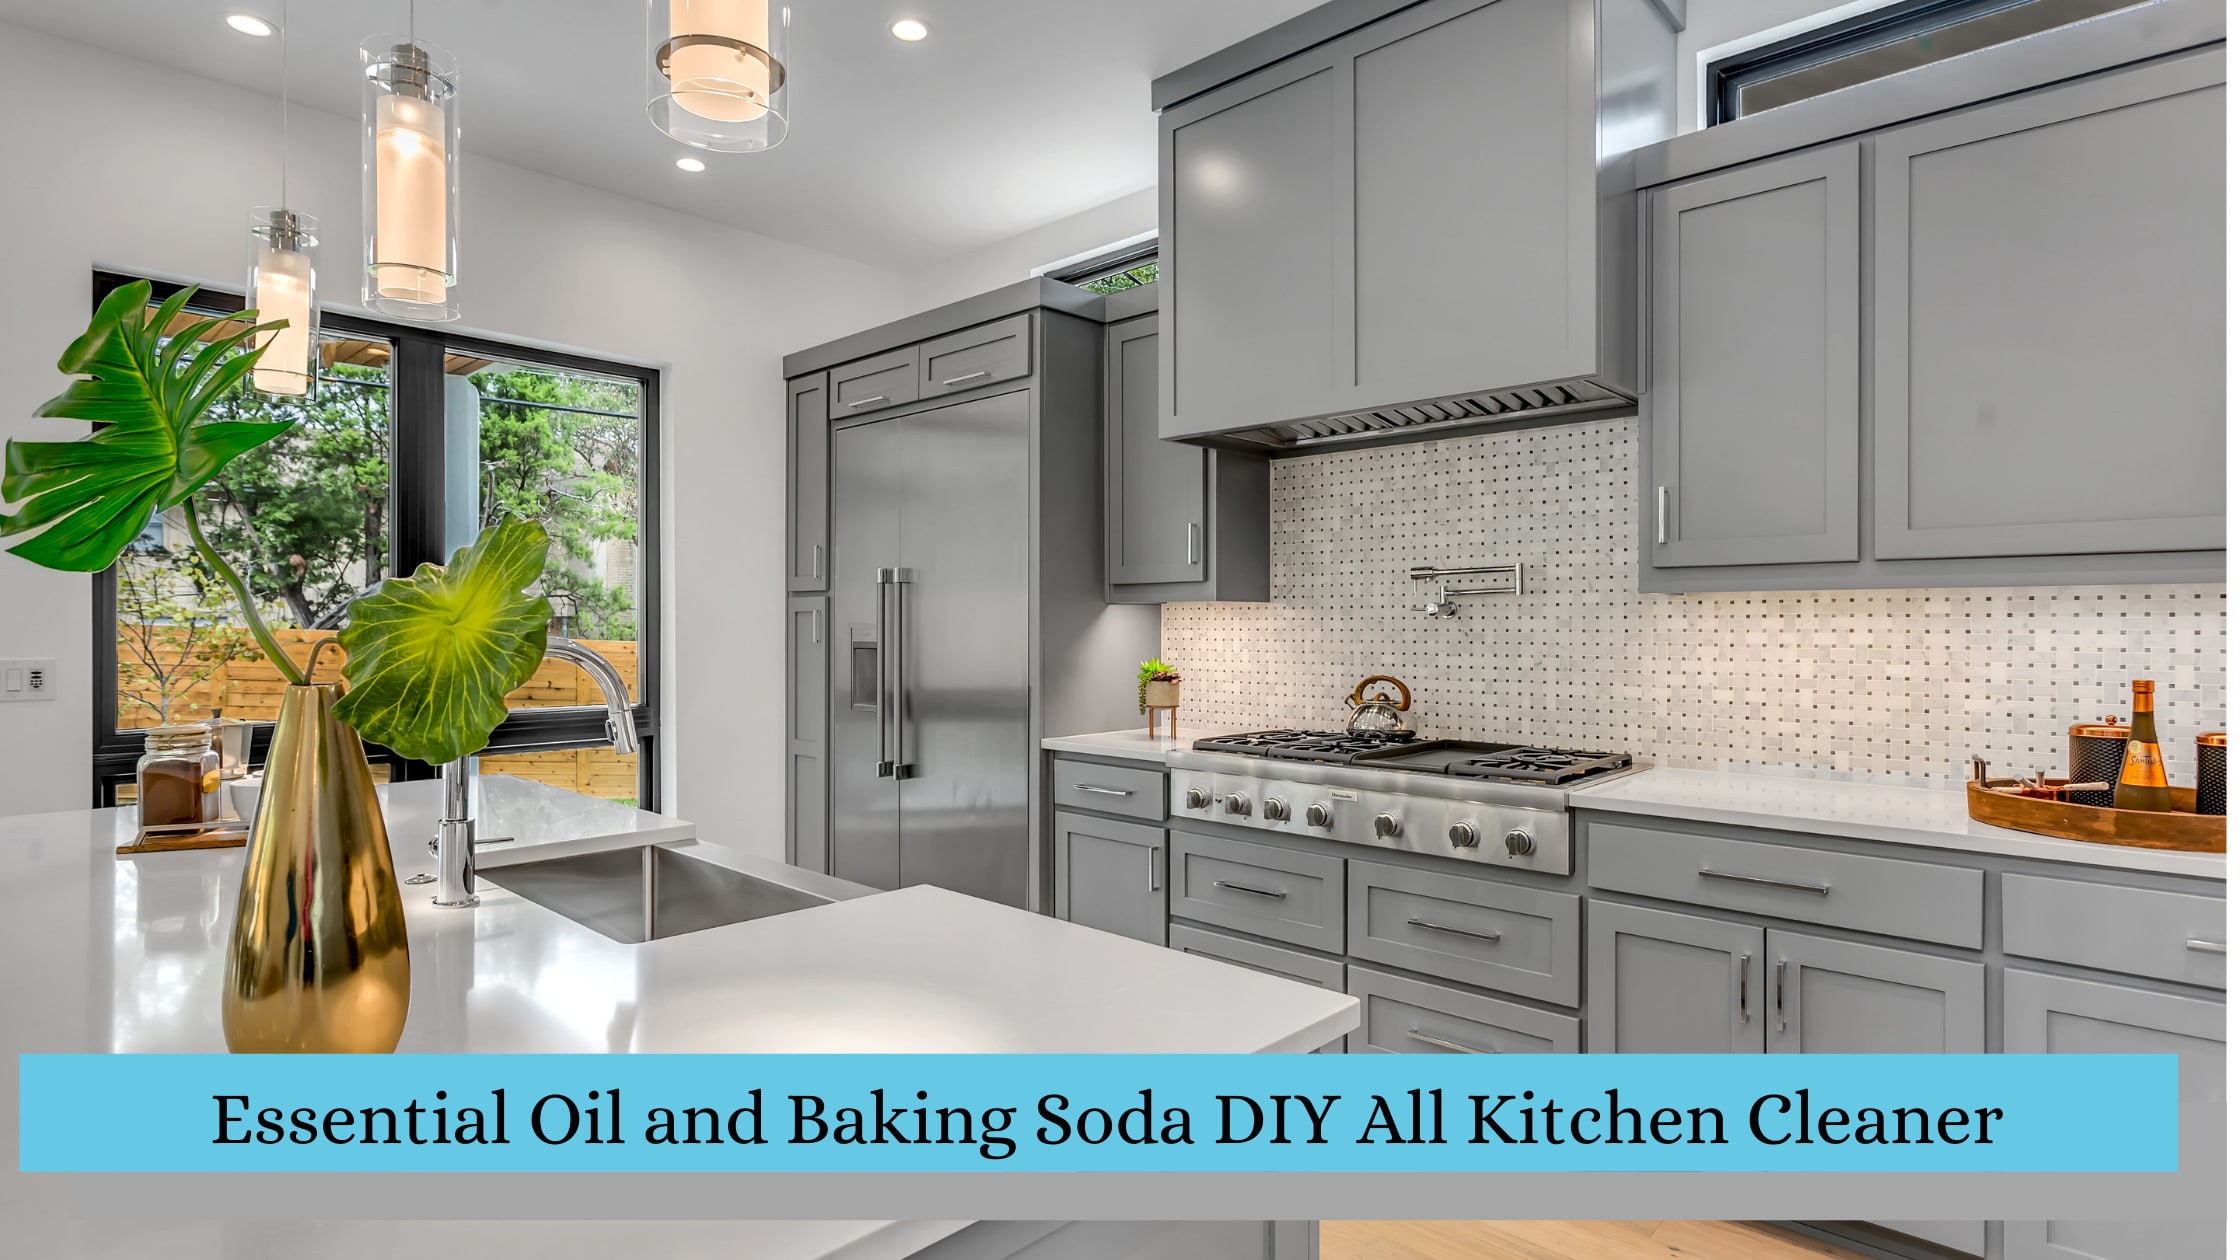 Essential Oil and Baking Soda DIY kitchen Cleaner